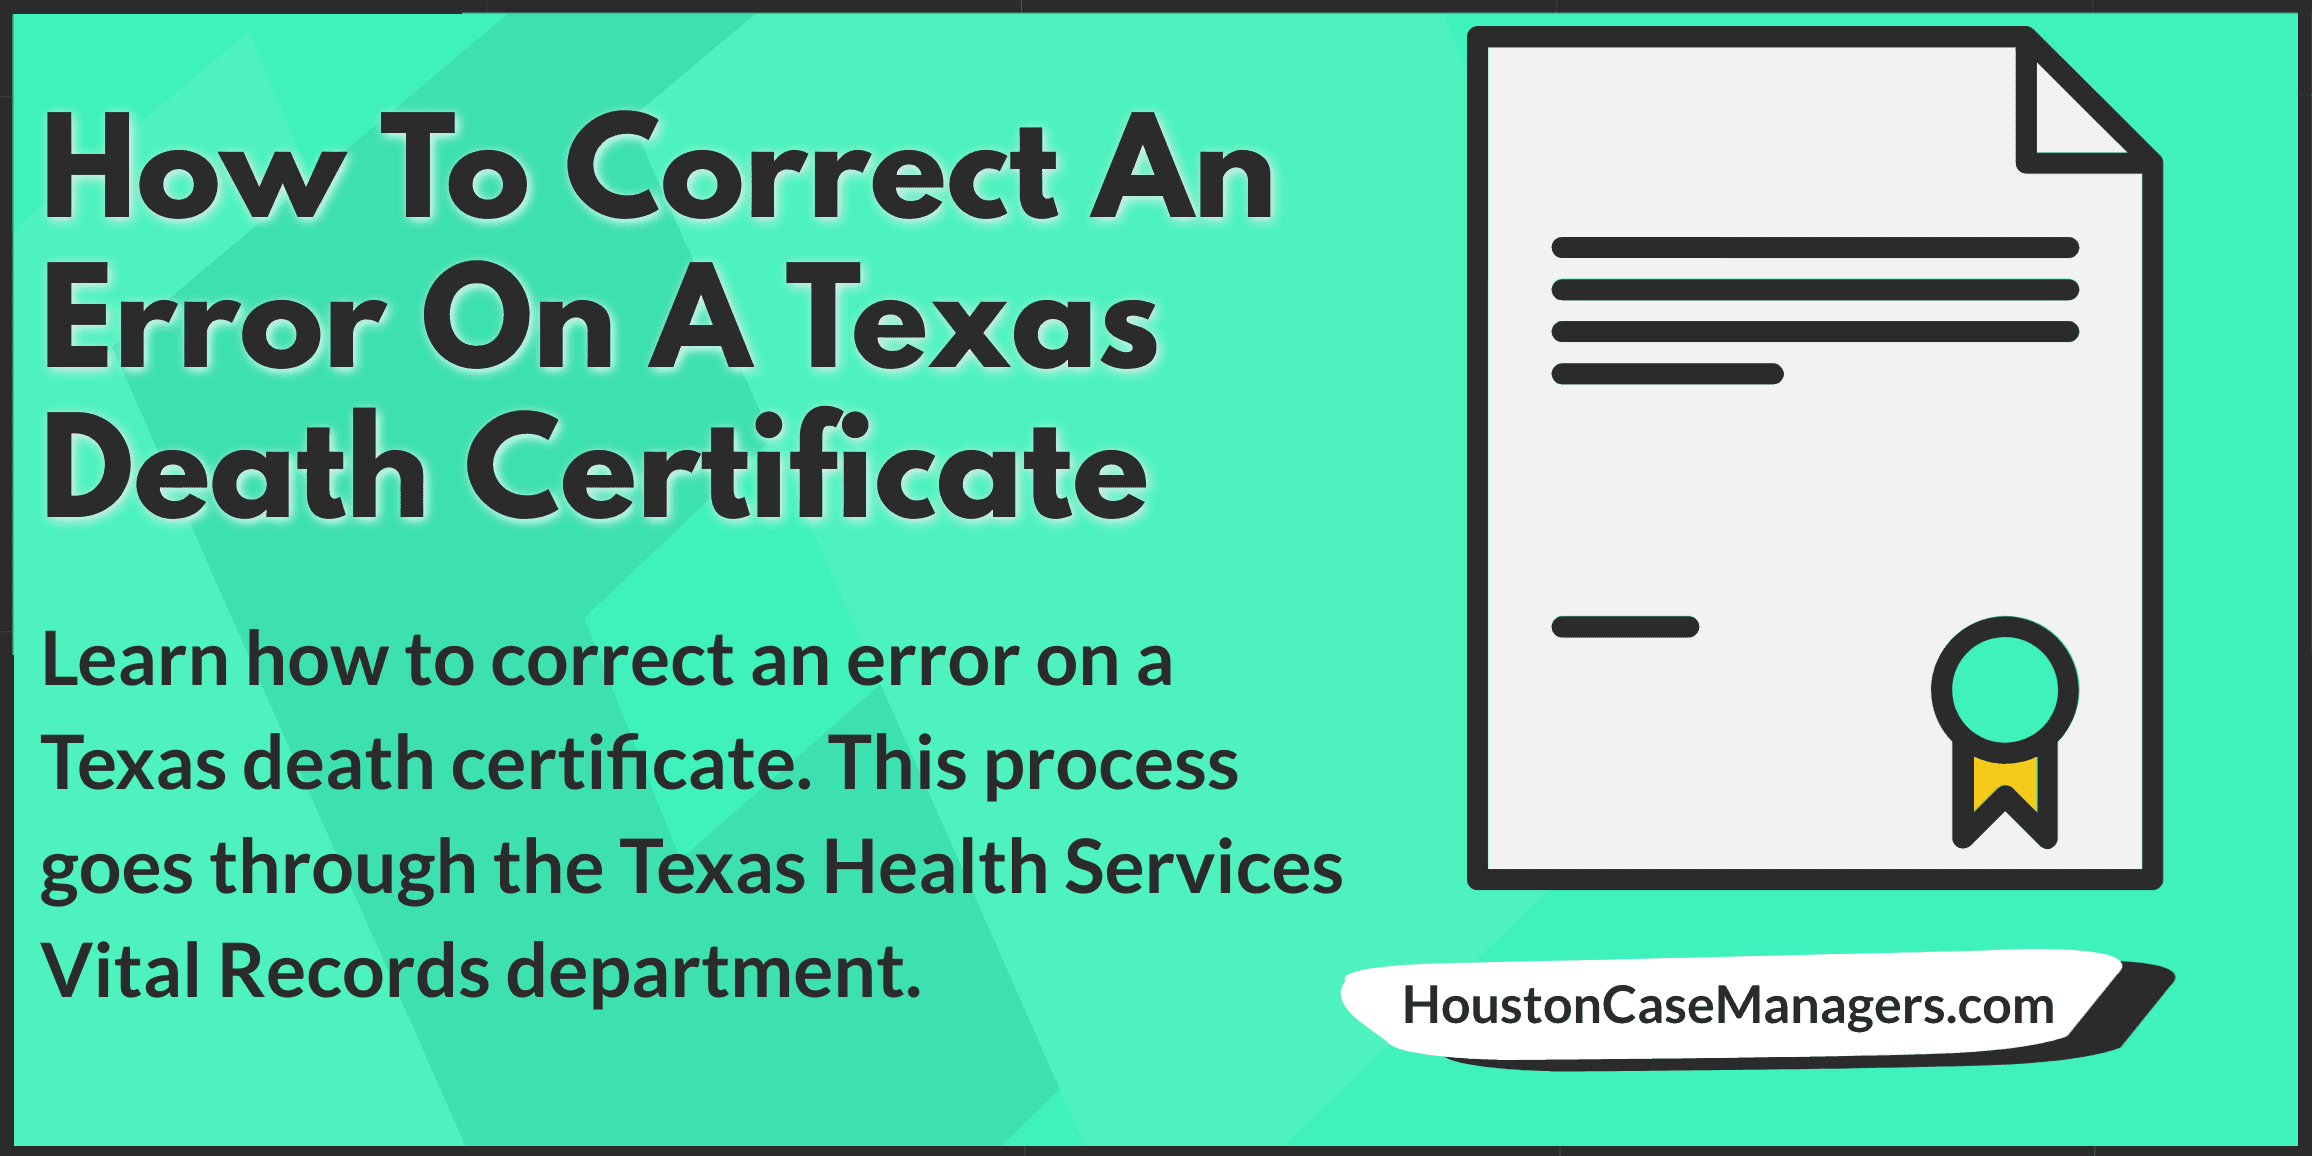 How To Correct An Error On A Texas Death Certificate